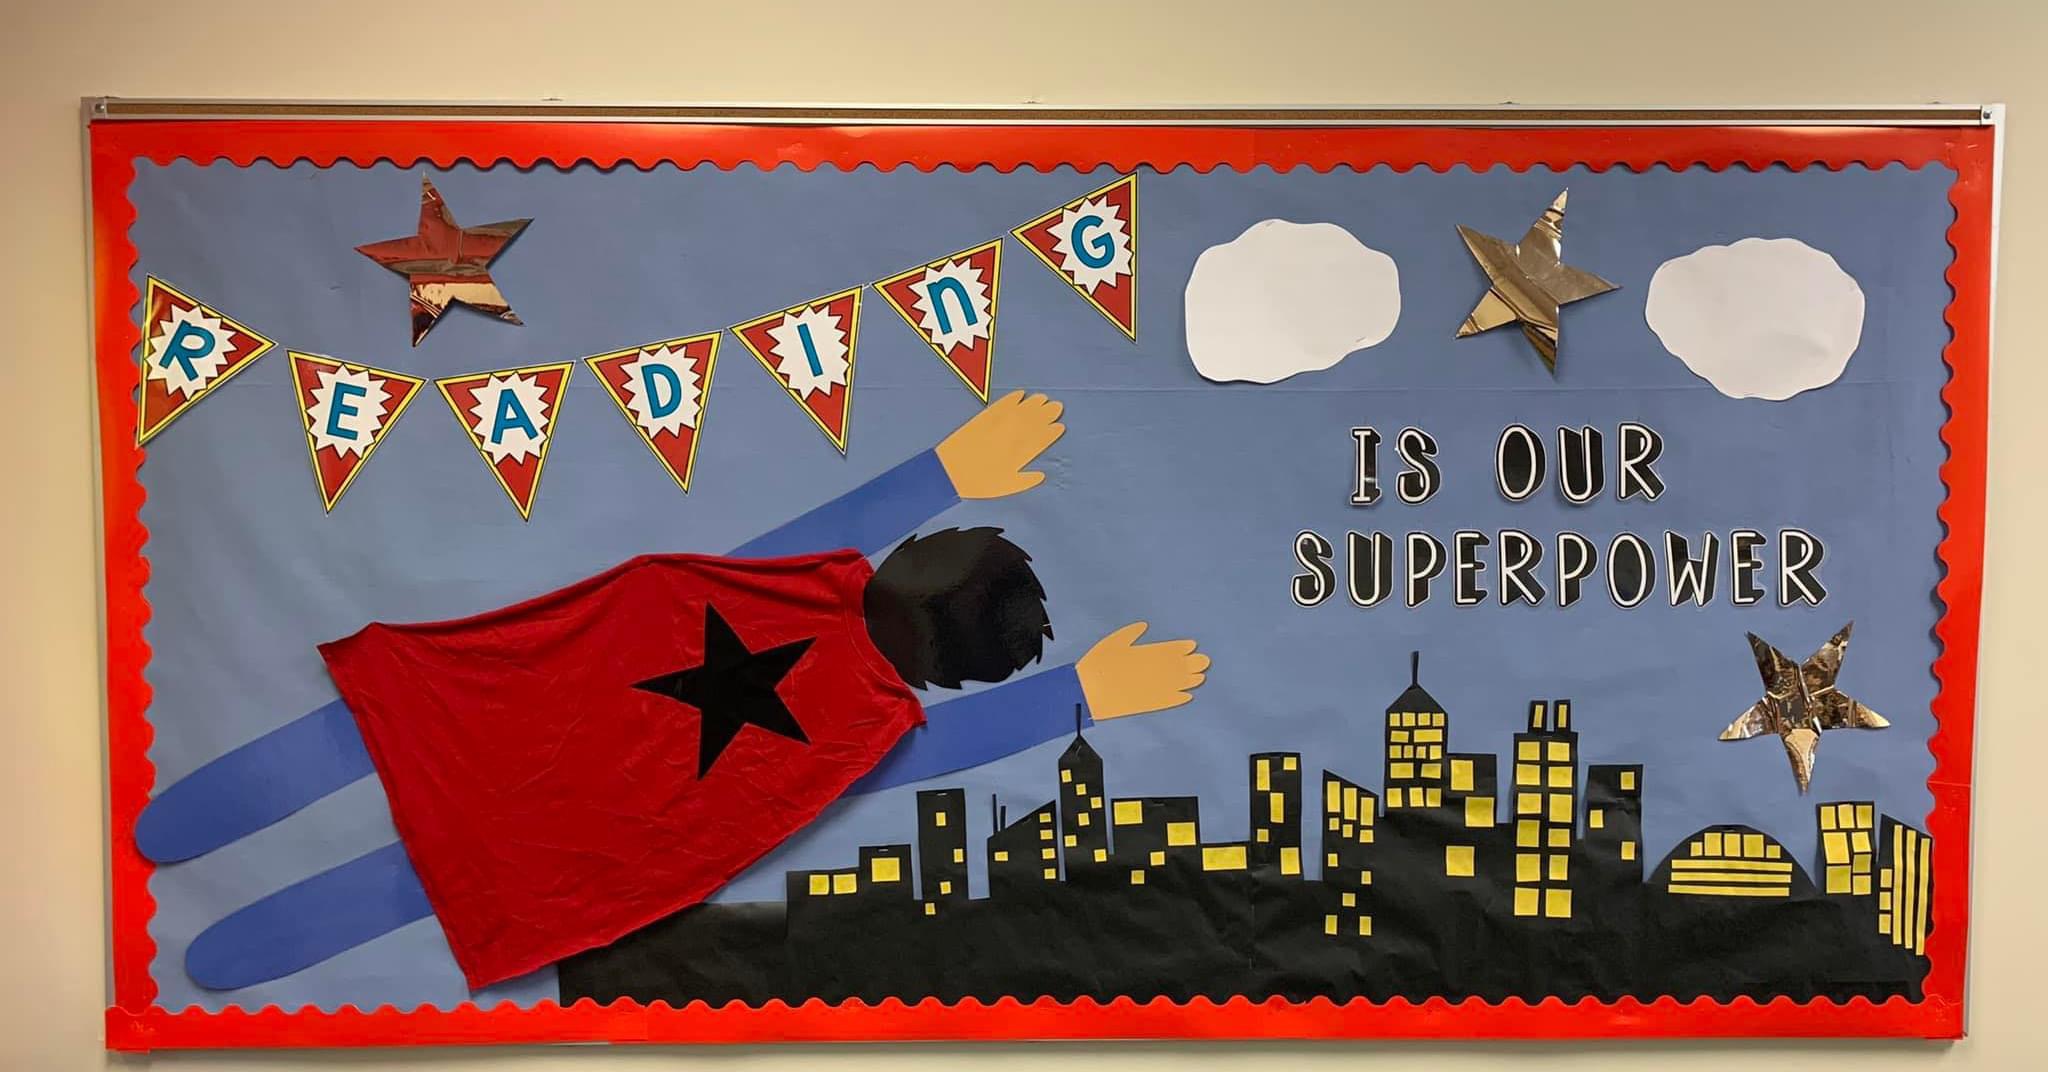 A bulletin board shows superman flying across it and says Reading is my Superpower.